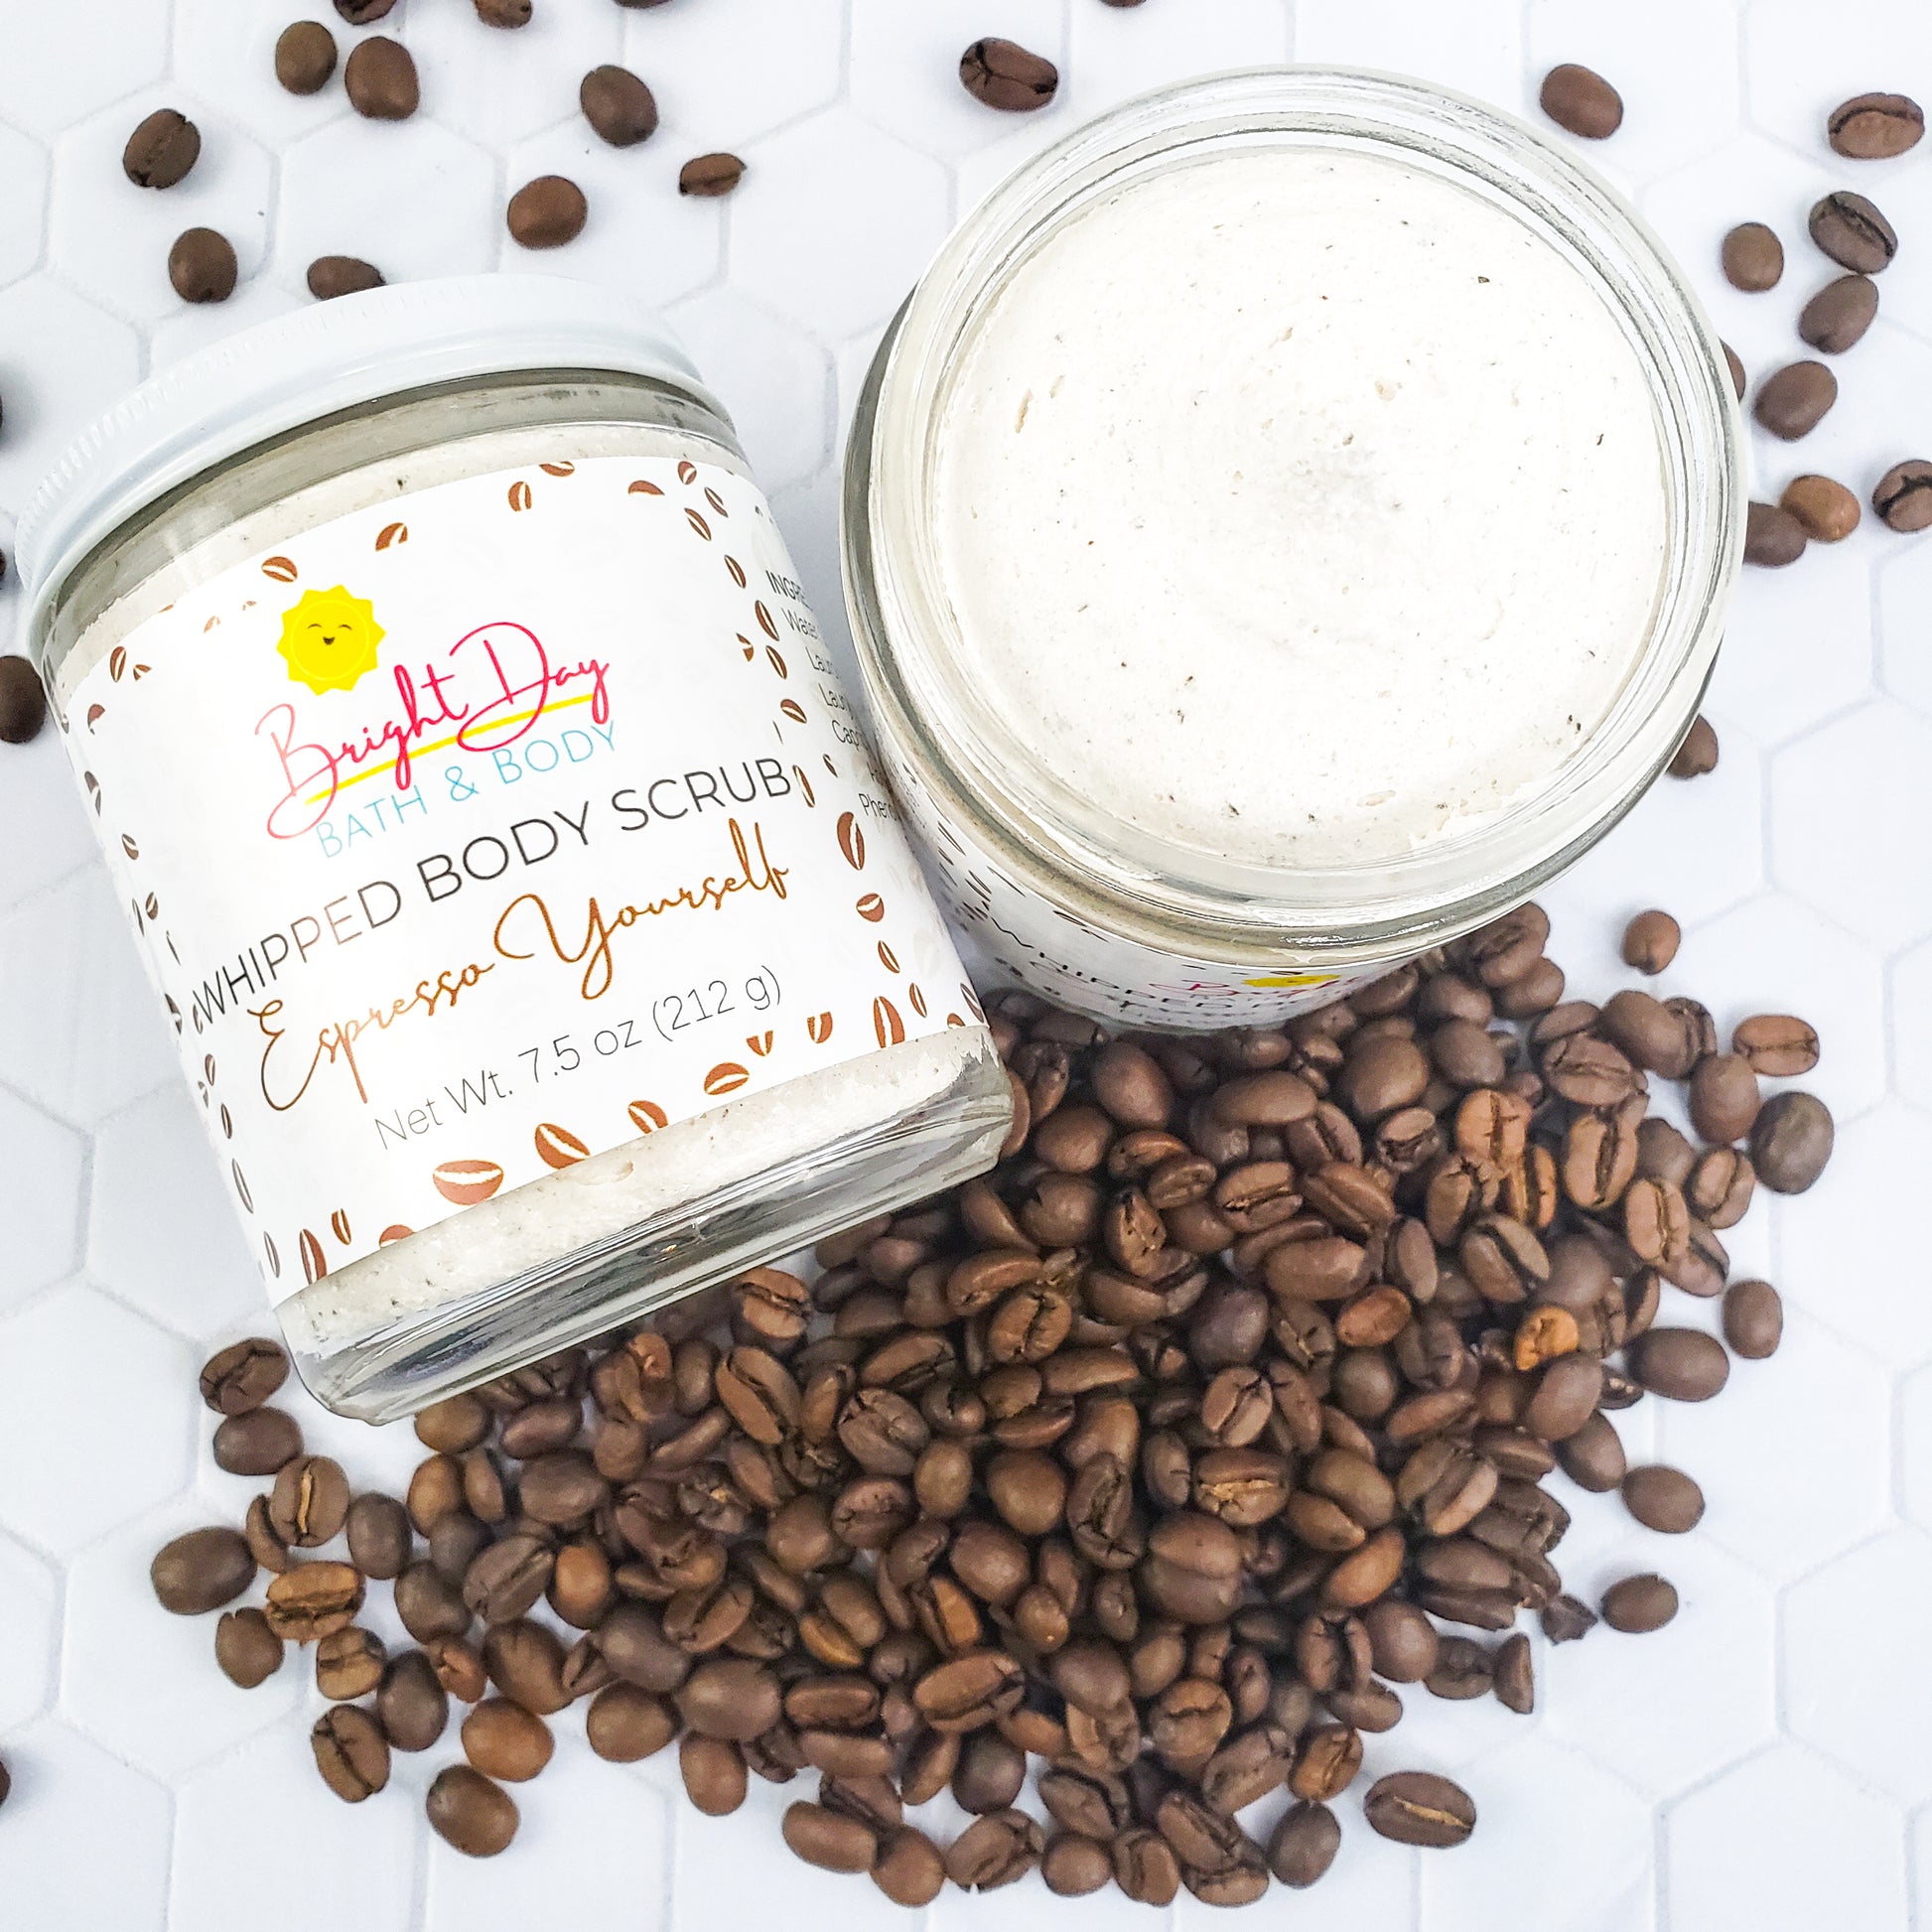 Two Espresso Yourself Body Scrub jars surrounded by coffee beans